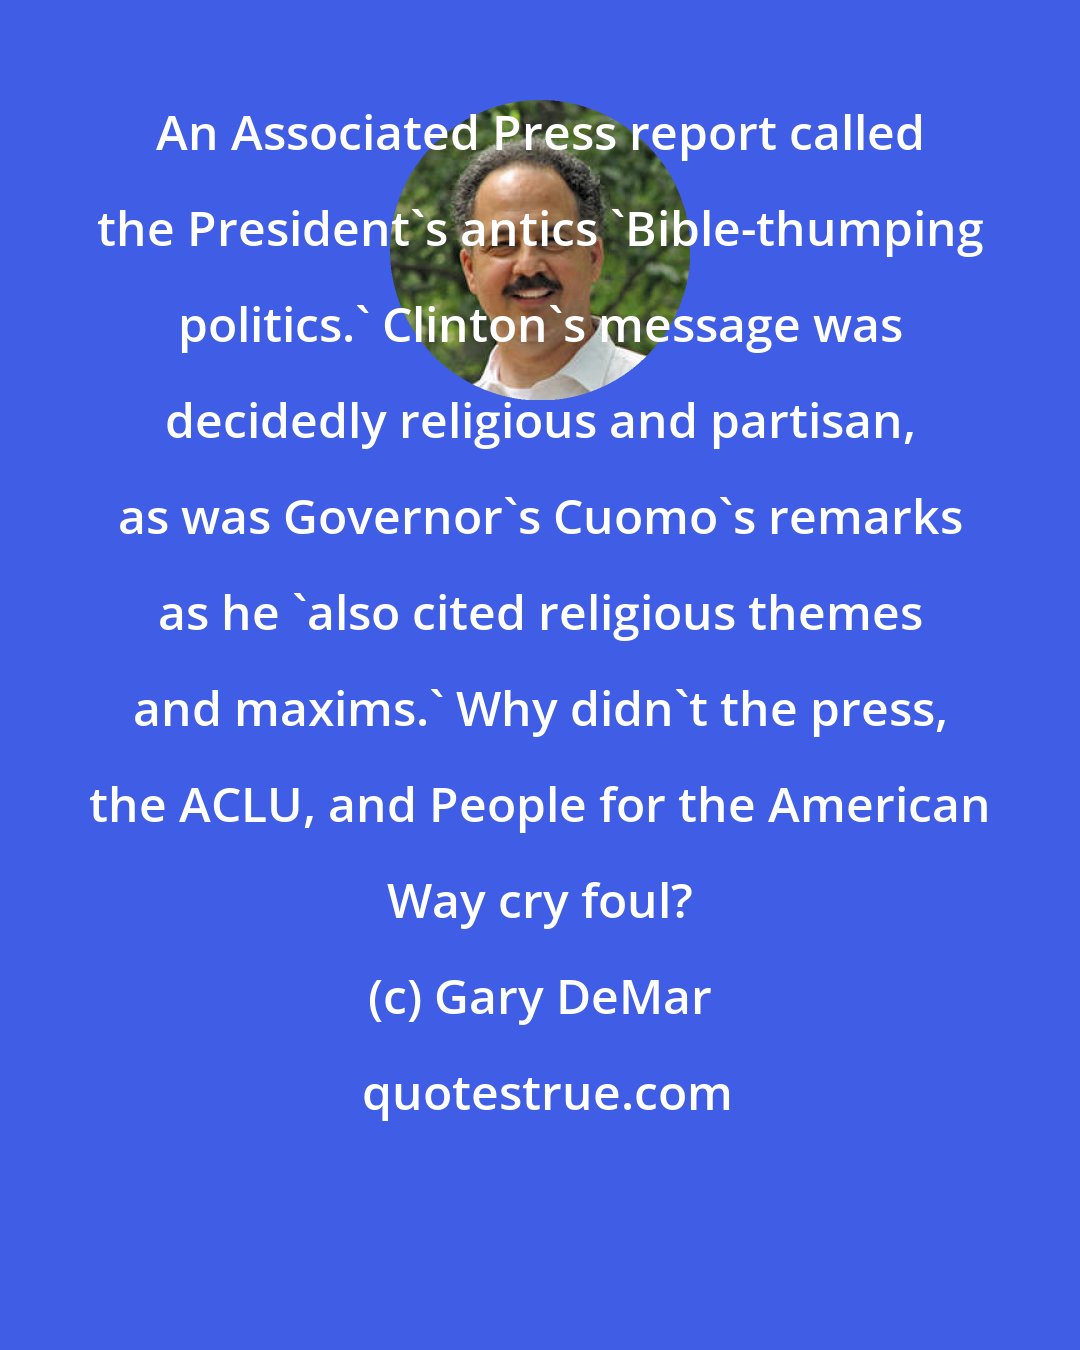 Gary DeMar: An Associated Press report called the President's antics 'Bible-thumping politics.' Clinton's message was decidedly religious and partisan, as was Governor's Cuomo's remarks as he 'also cited religious themes and maxims.' Why didn't the press, the ACLU, and People for the American Way cry foul?